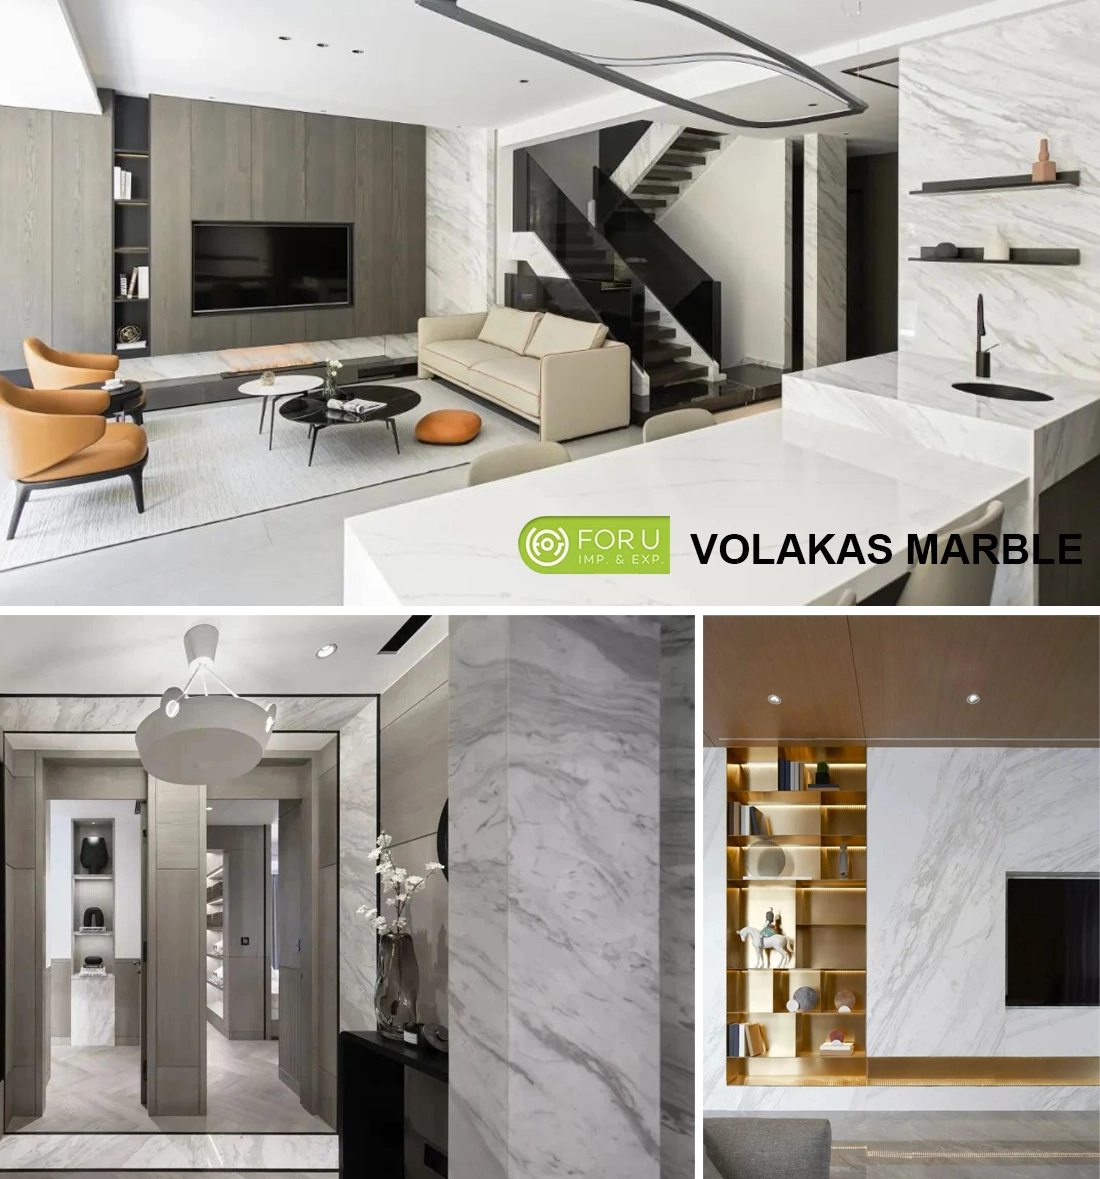 Volakas Marble Wall Tiles Designs FOR U STONE